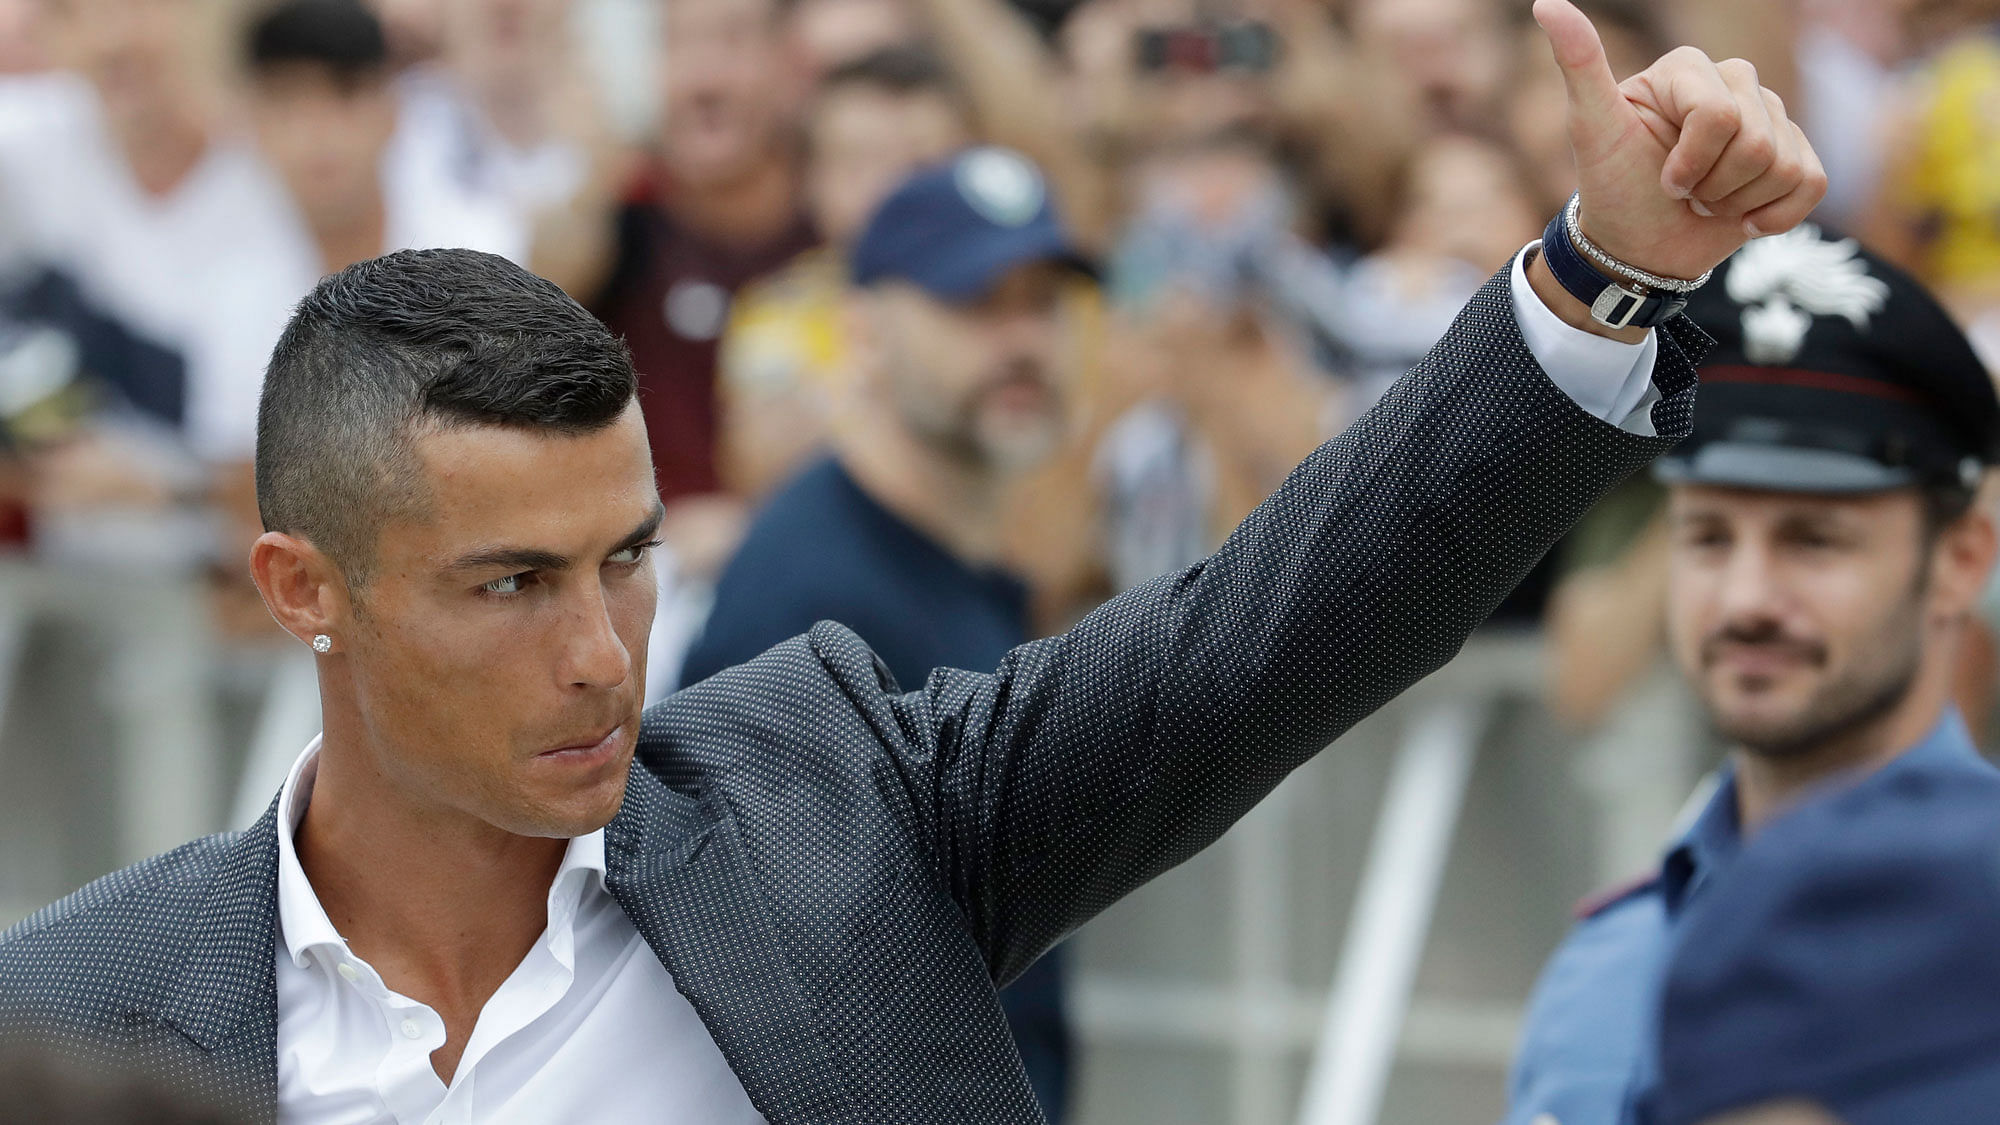 Cristiano Ronaldo is “very calm” amid the latest developments in a case of alleged rape against him, claims Juventus coach.